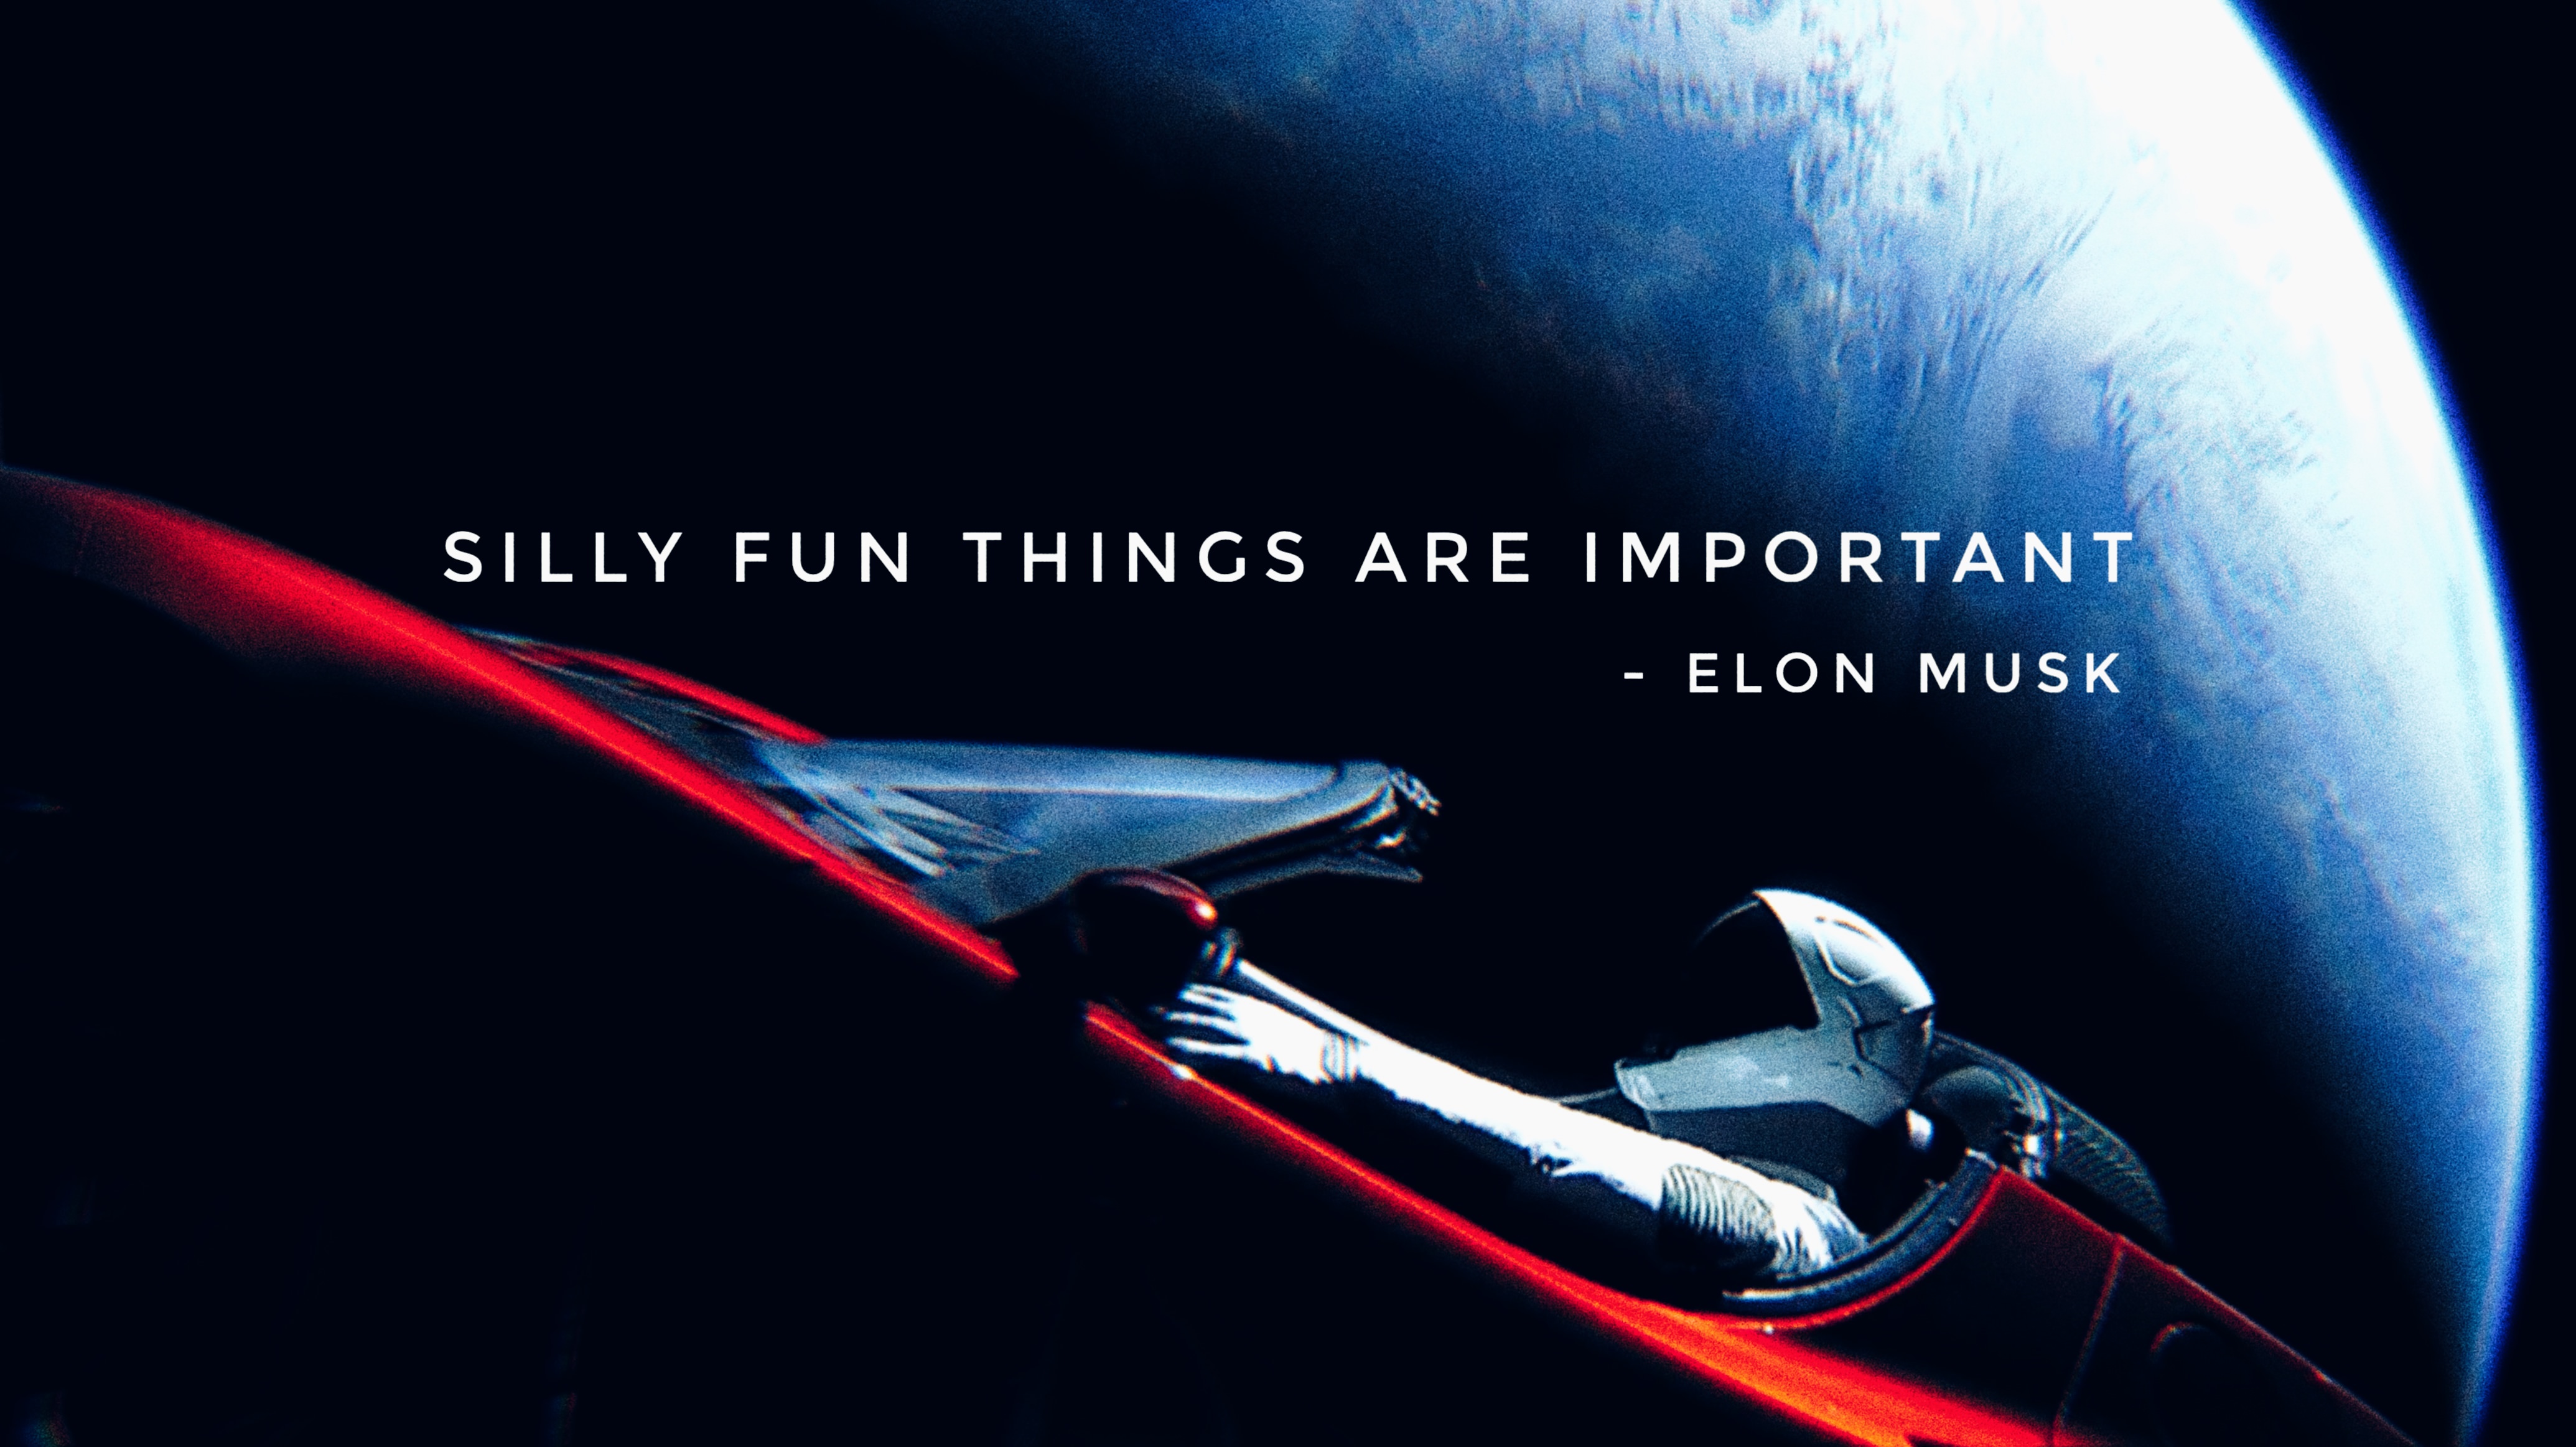 best elon musk quote - Silly Fun Things Are Important Elon Musk